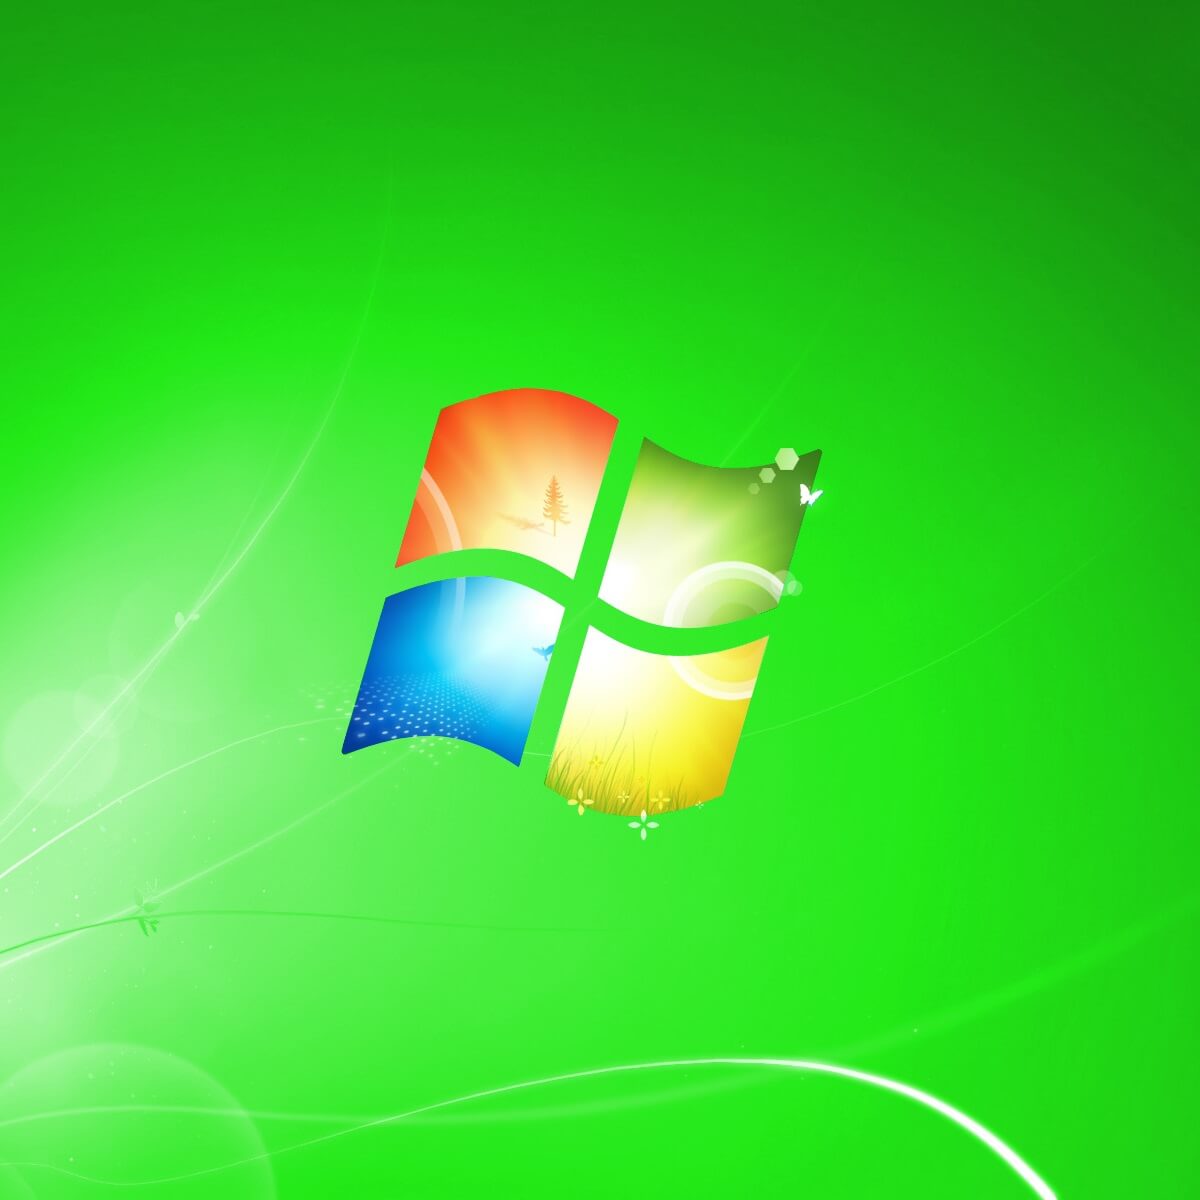 How to disable the Windows 7 out of support message